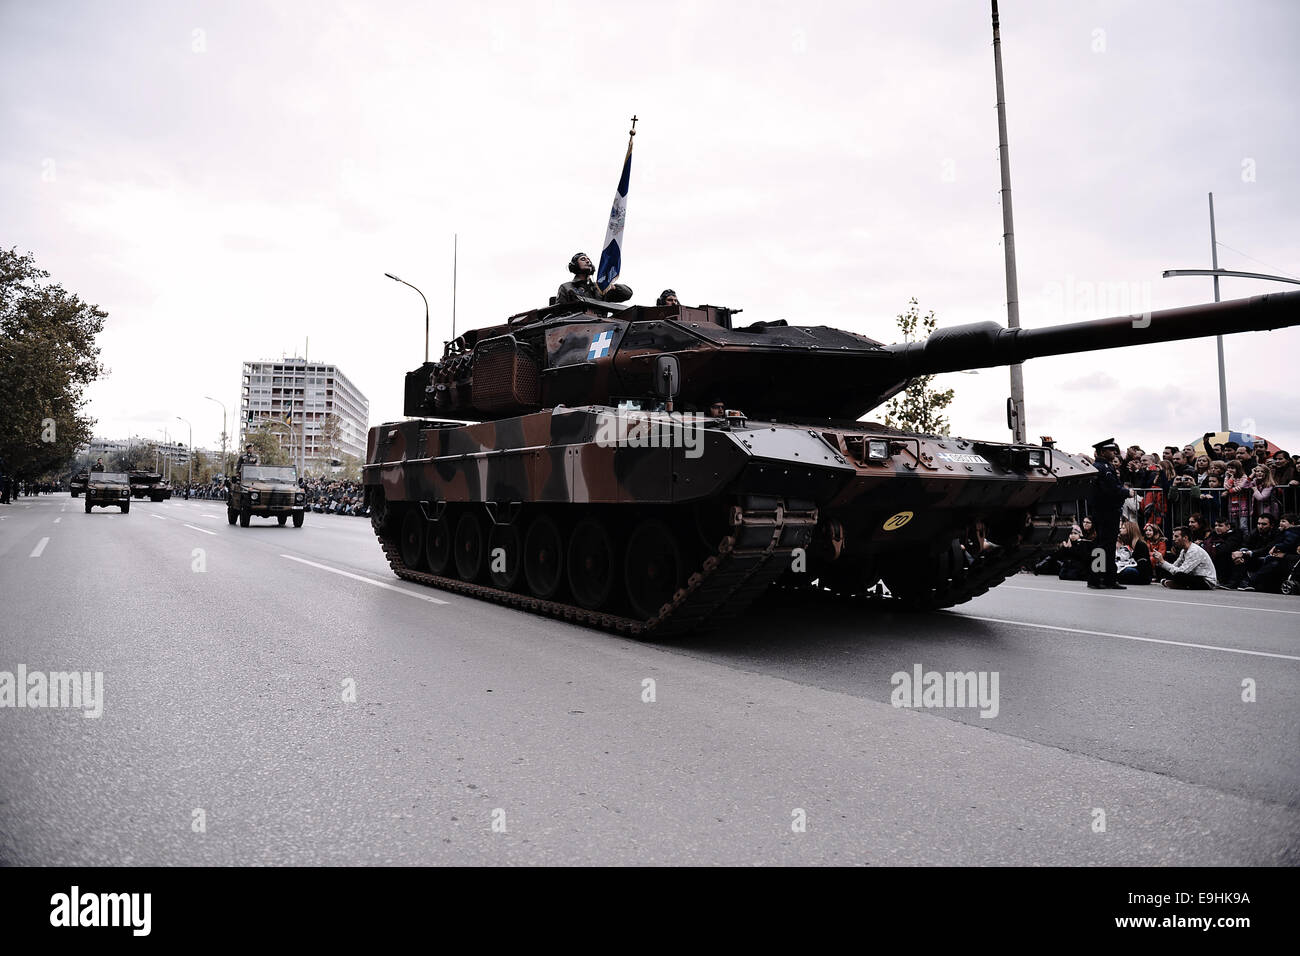 Thessaloniki, Greece. 28th October, 2014. A Leopard 2 HEL tank during the military parade that was held in Thessaloniki during the celebrations of the 28th of October anniversary, the date that Greece entered the World War II in 1940. Credit:  Giannis Papanikos/Alamy Live News Stock Photo